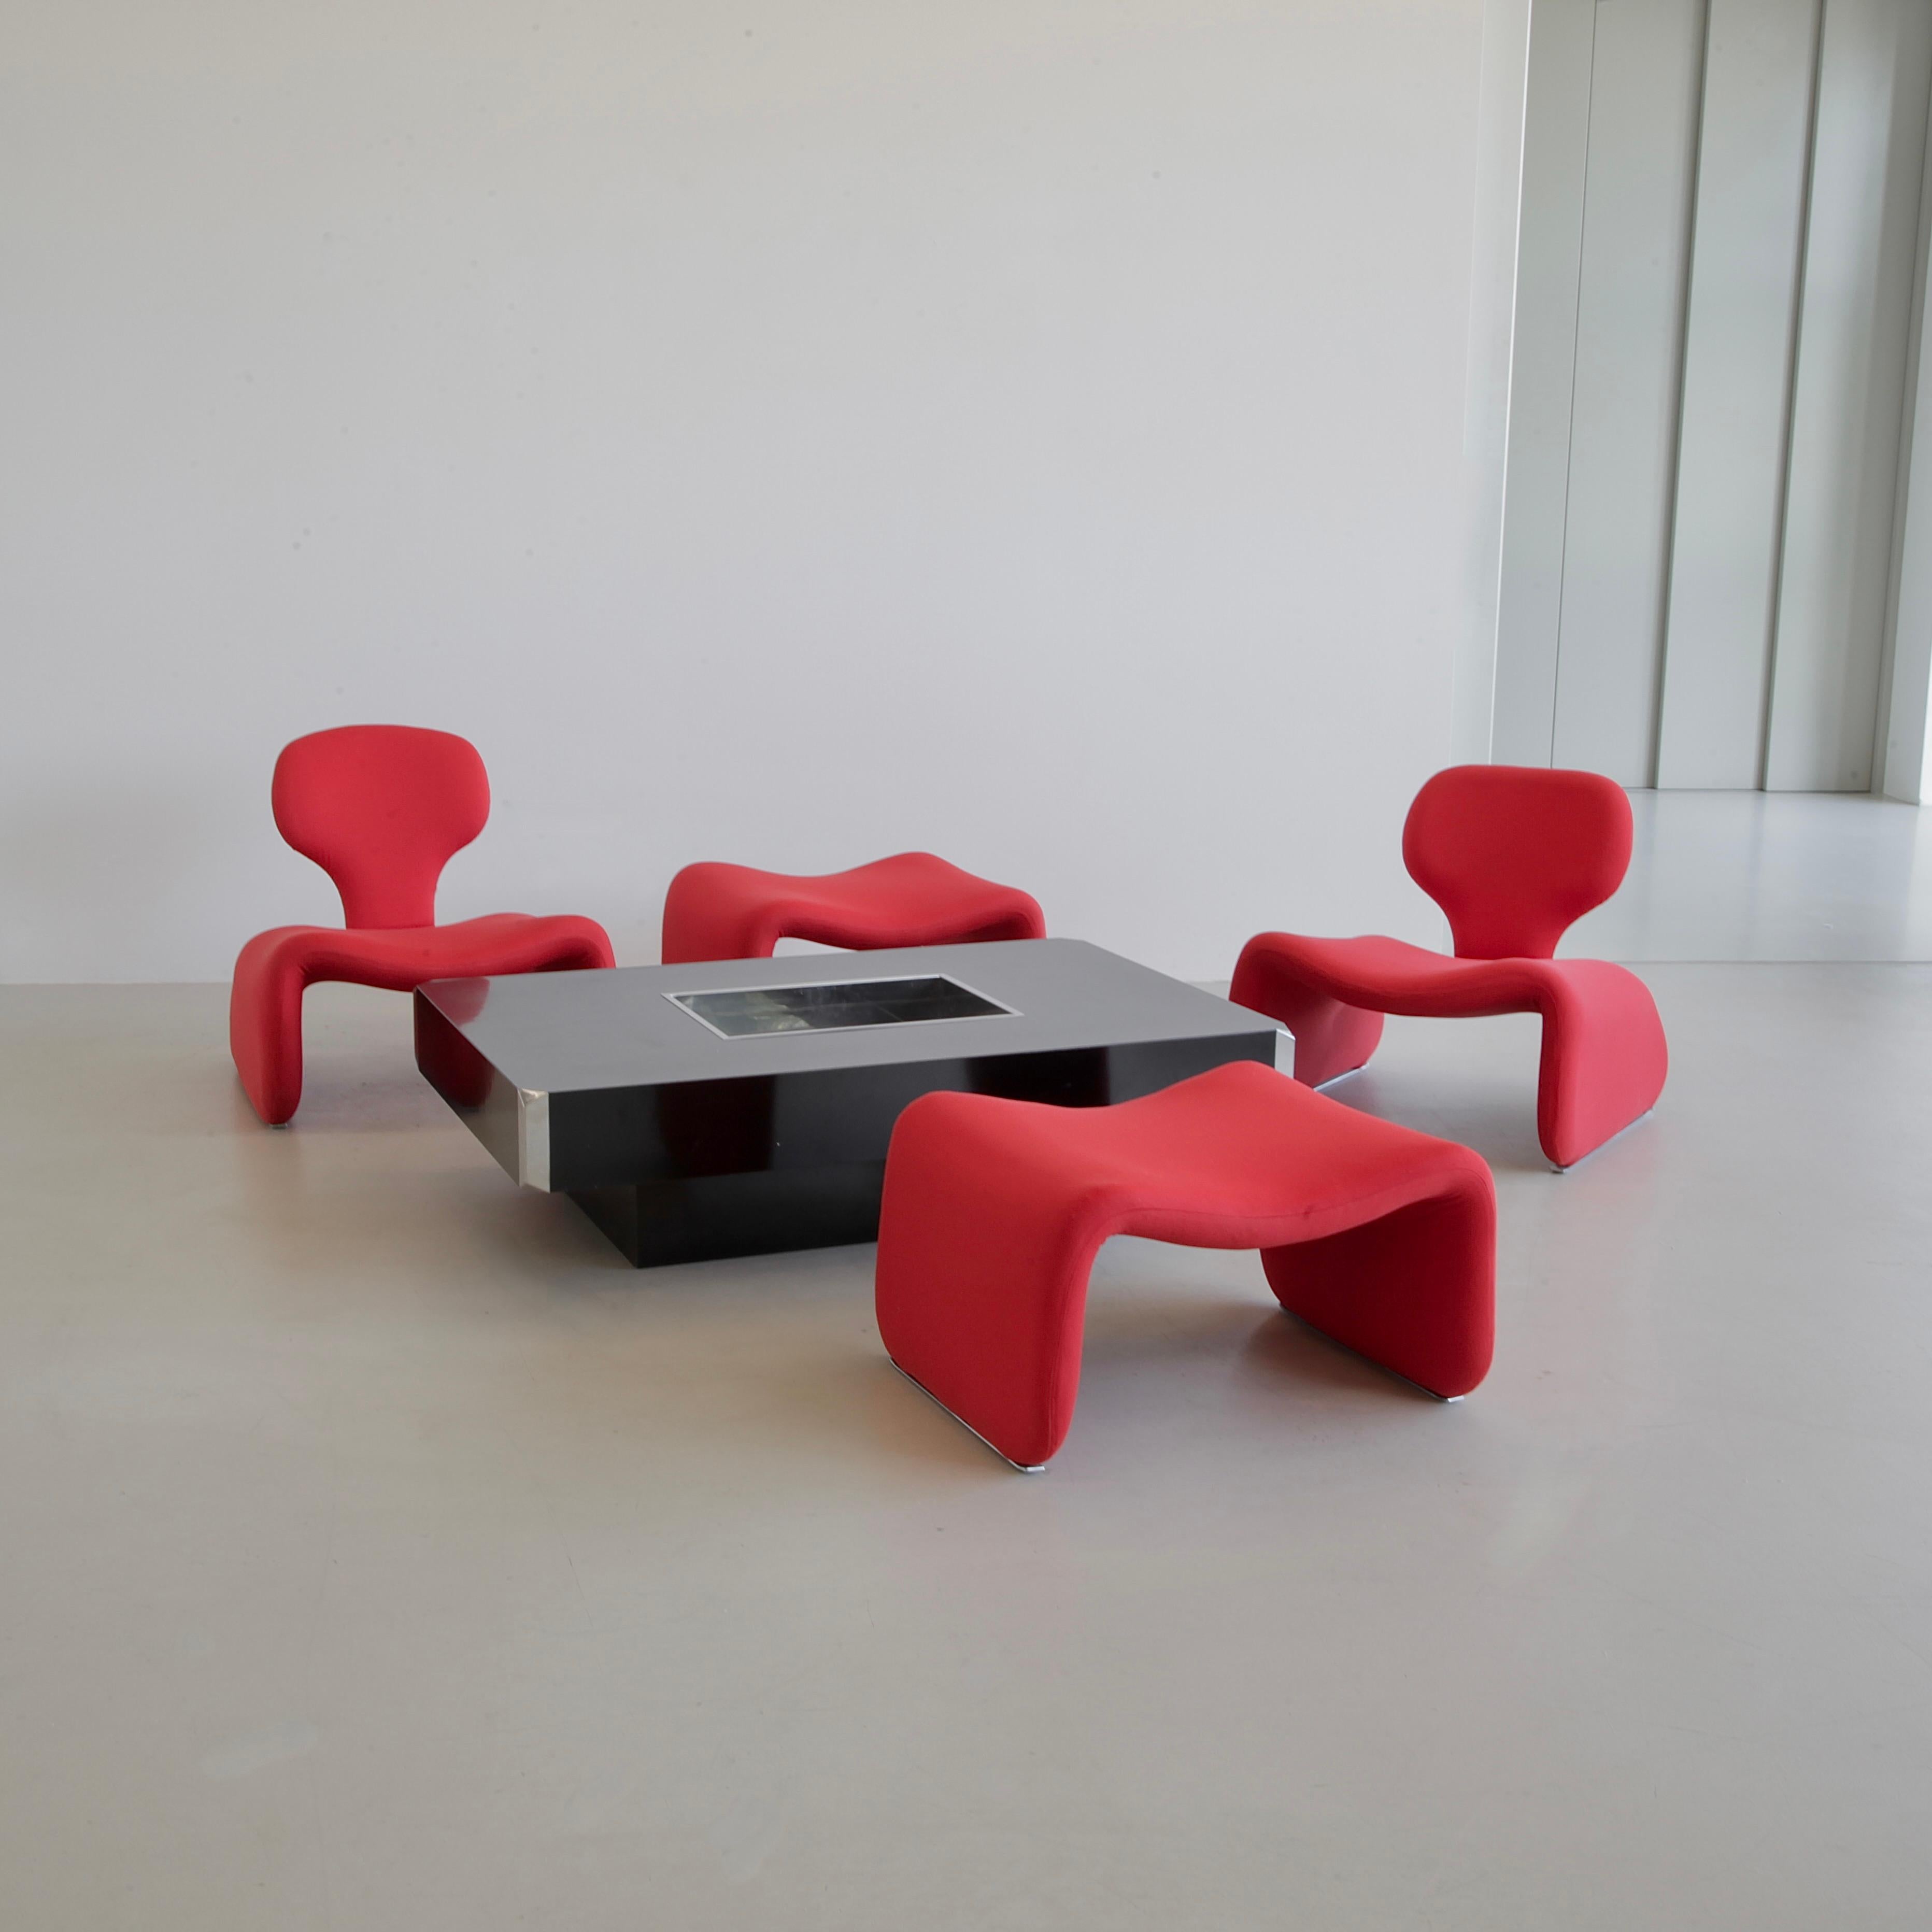 Wool Dijnn Chair and Footstool, Designed by Olivier Mourgue, France, Airborne, 1965 For Sale